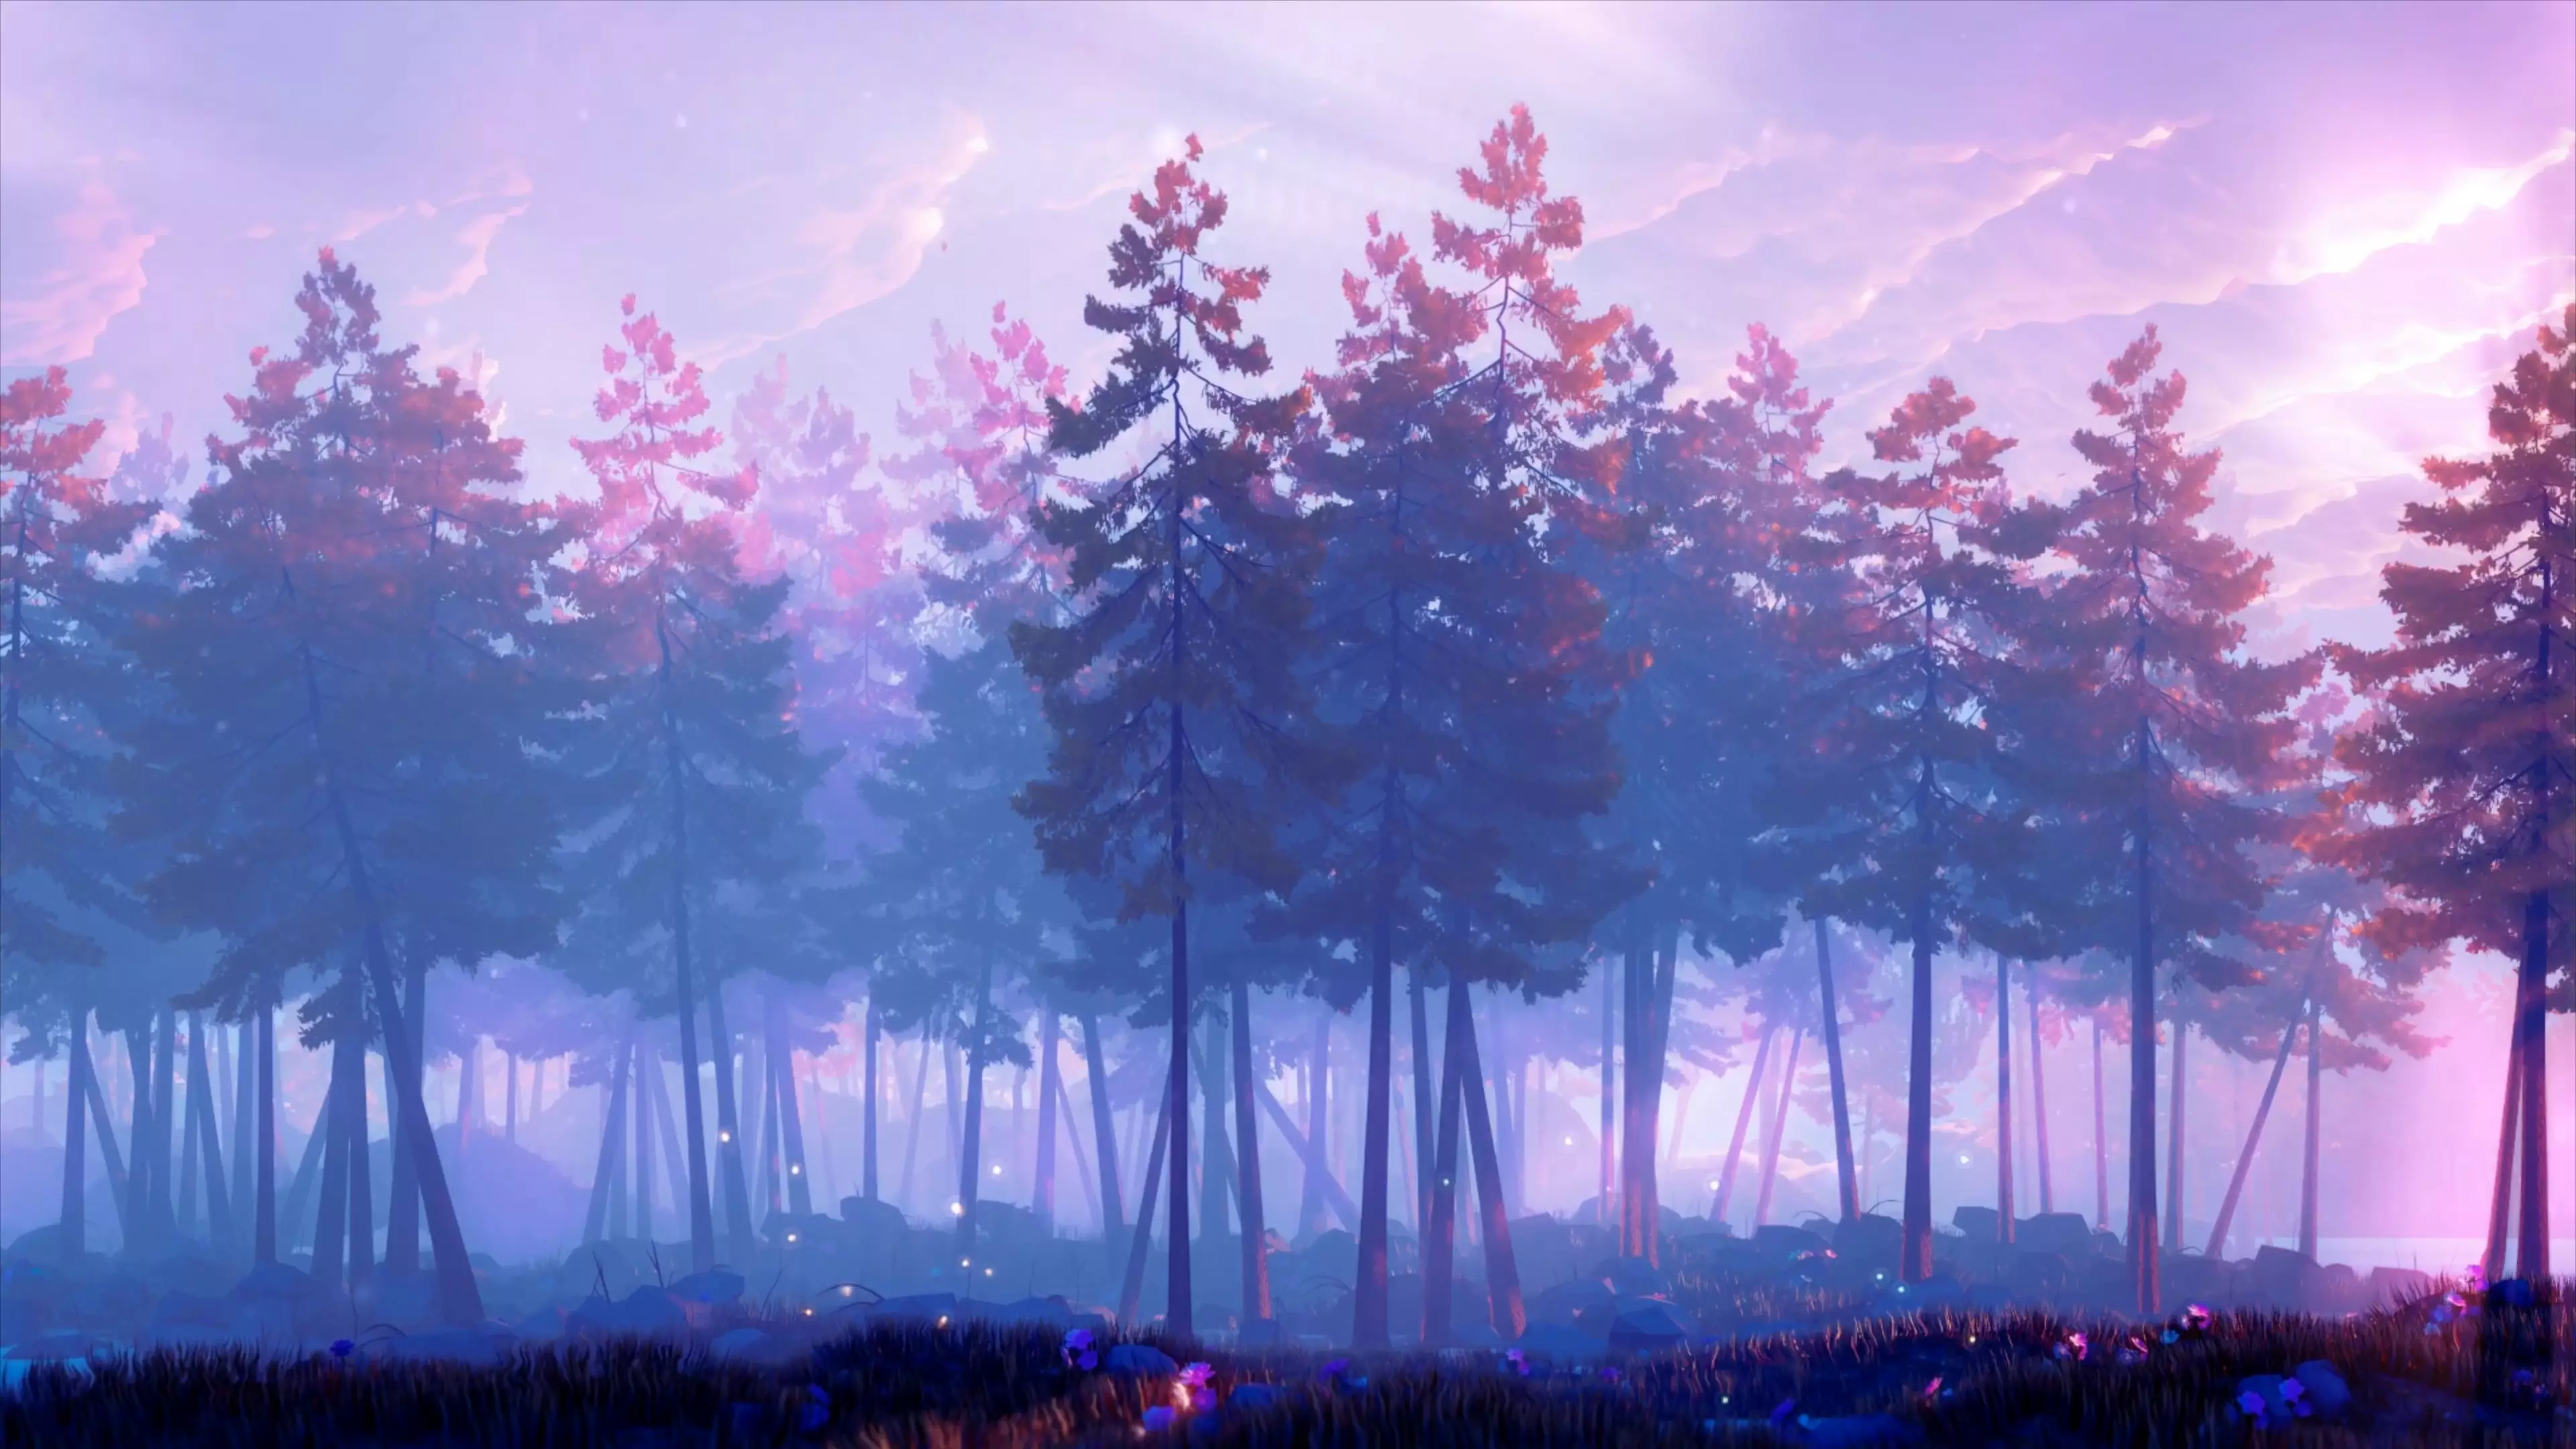 Video wallpaper Aesthetic Pine Forest (Landscapes)